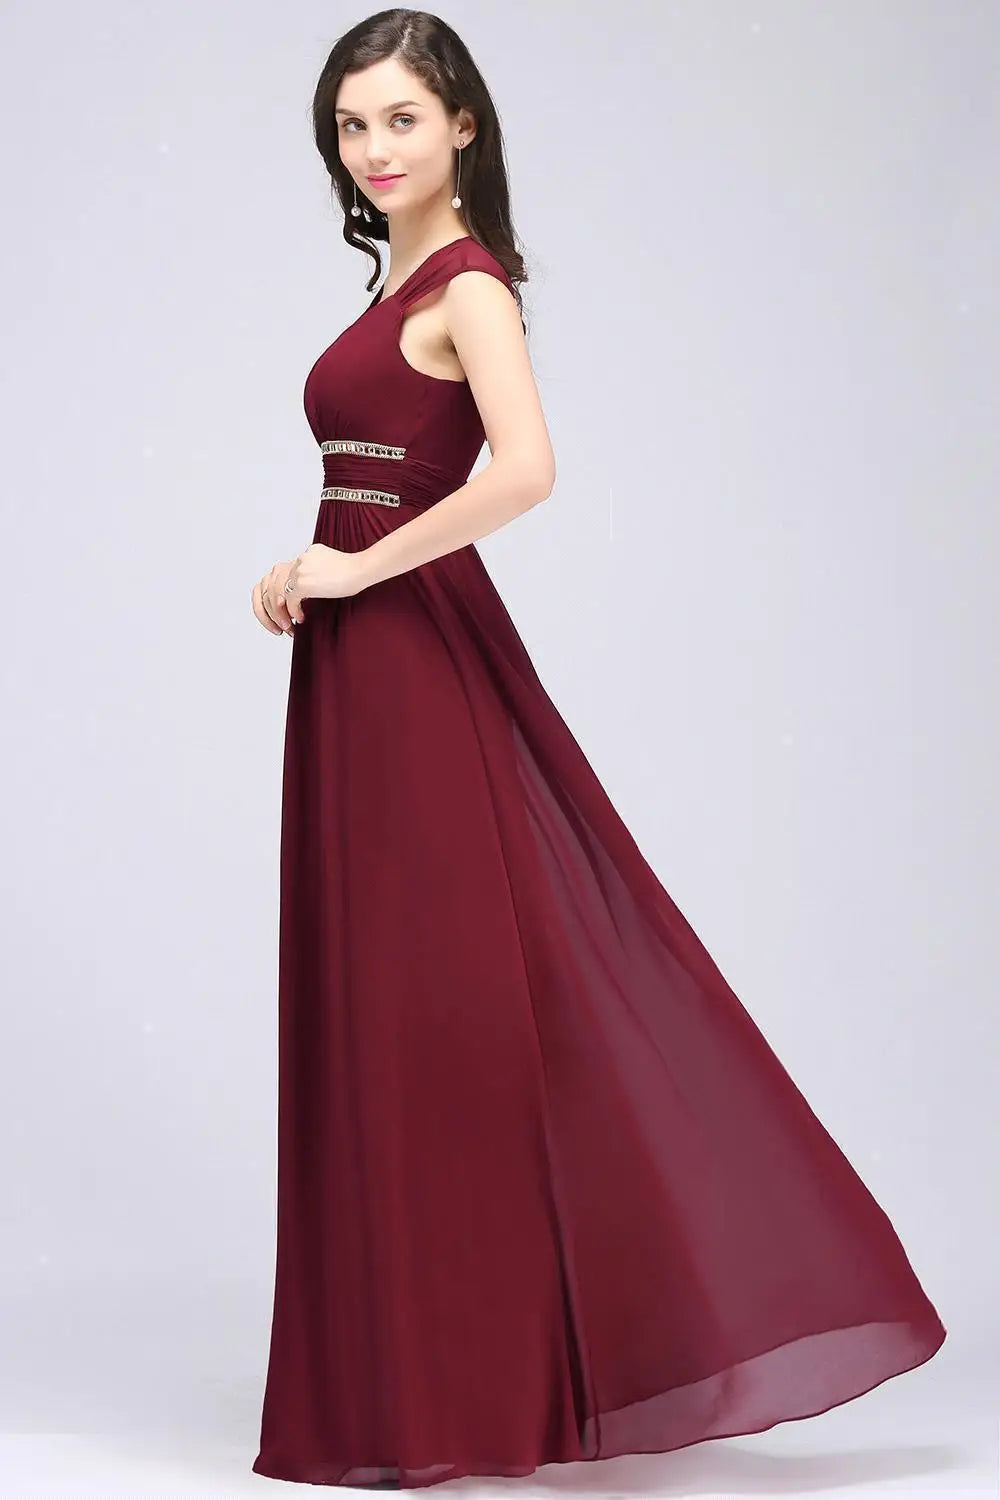 Ladies Long Chiffon Evening Dresses A-line V-Neck Sleeveless Crystal Beaded Backless Elegant Formal Wedding Evening Party Gowns